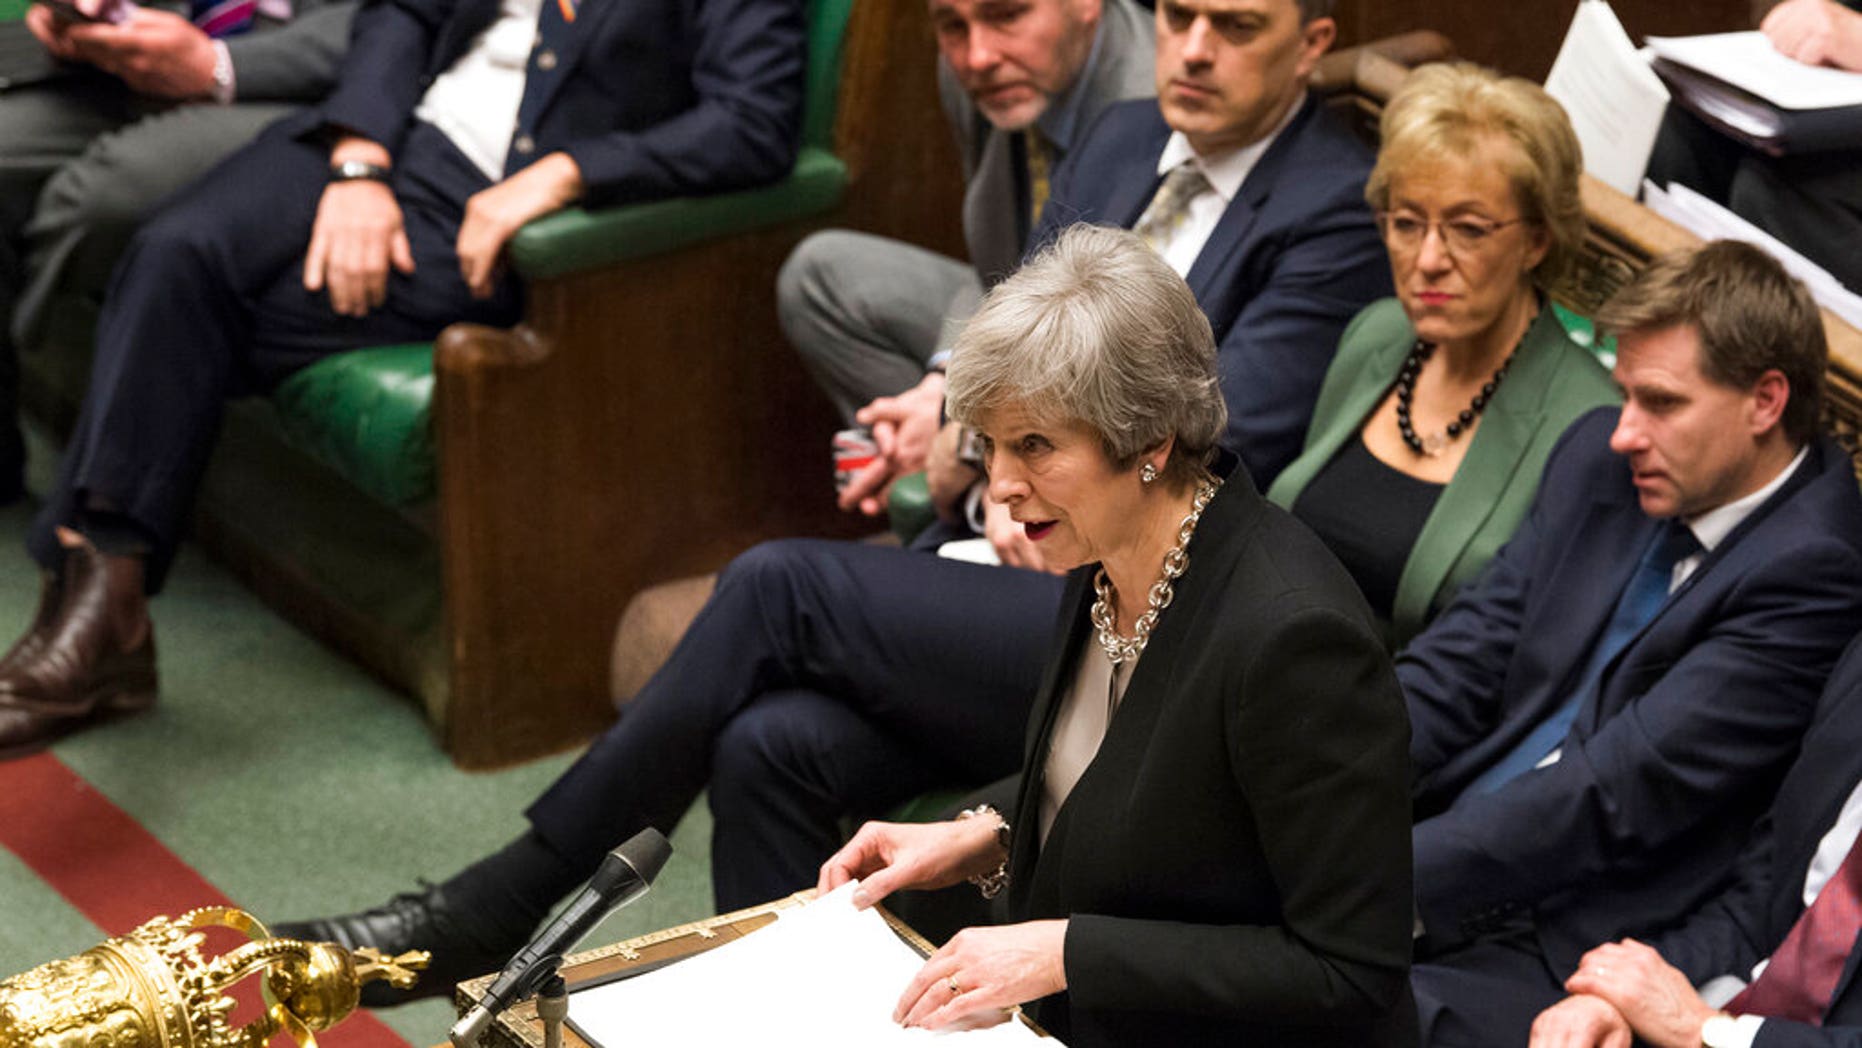 UK Parliament shoots down bid to delay Brexit, says it could back May’s deal with changes